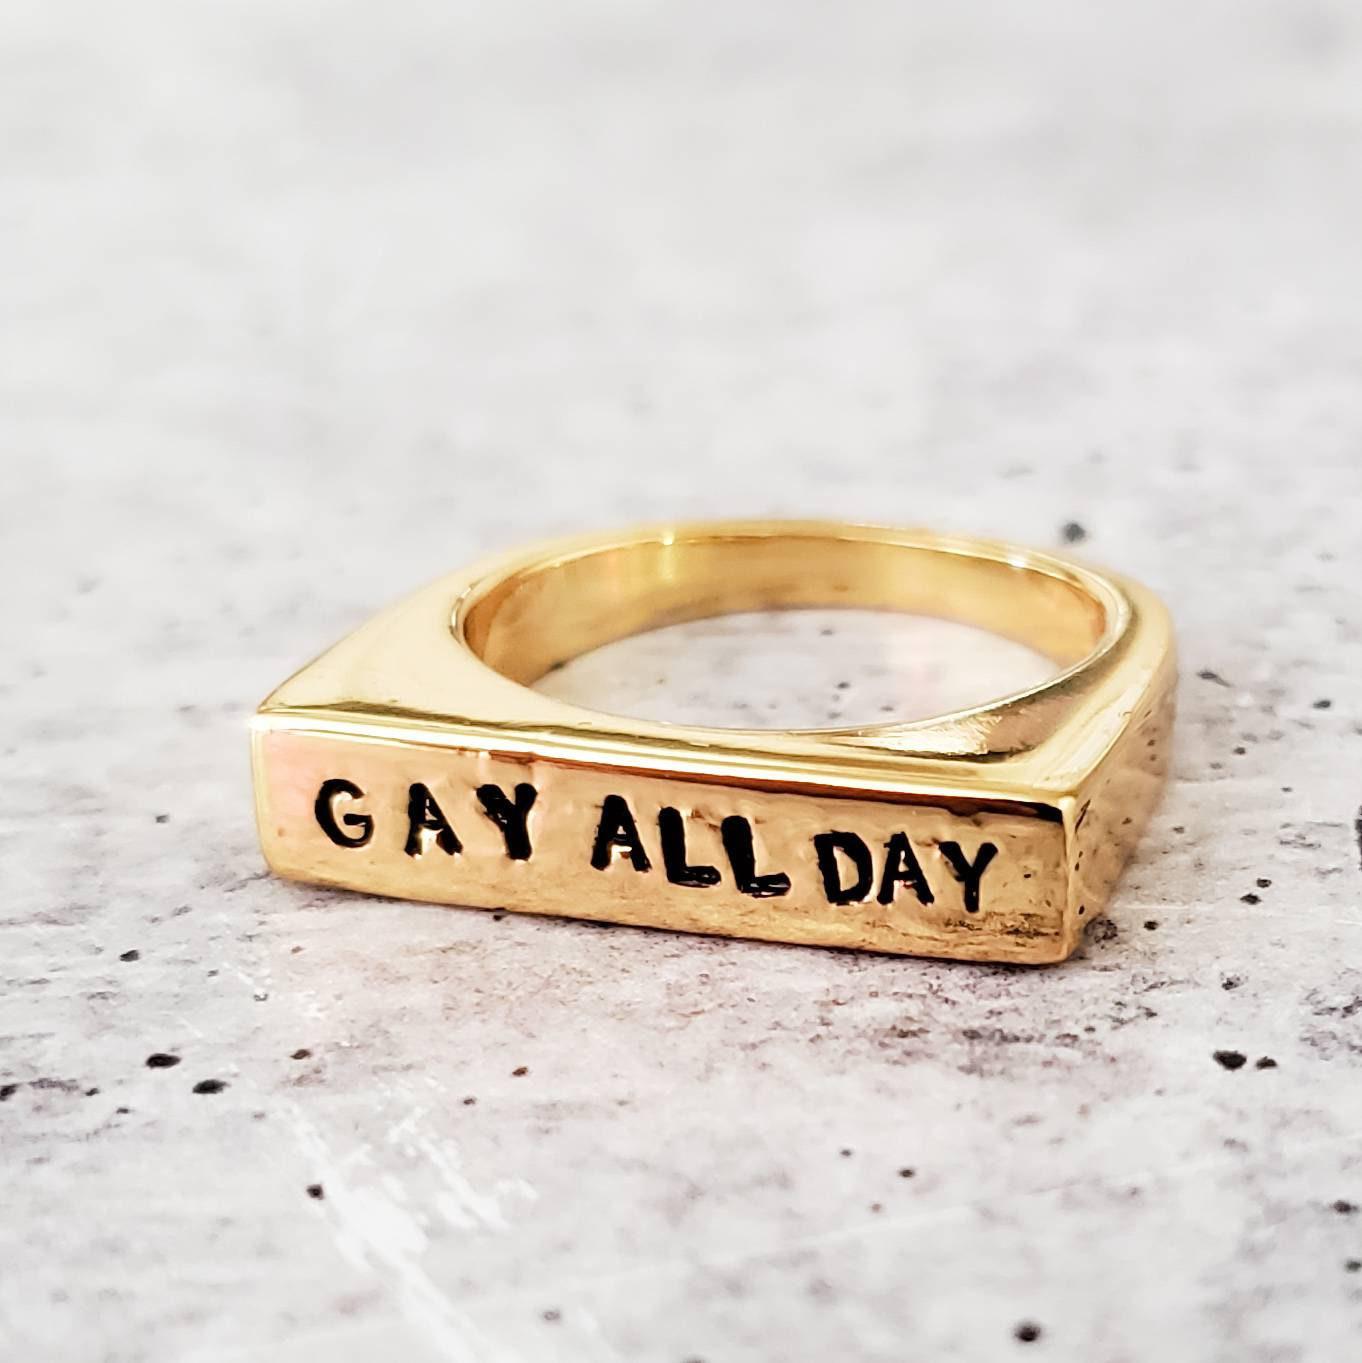 Gay All Day Ring - Le Dollar Bean Jewelry- PRIDE Ring -  LGBTQIA Jewelry - Gold Plated Flat Top Name Ring for Lesbian - Gay Pride Jewelry